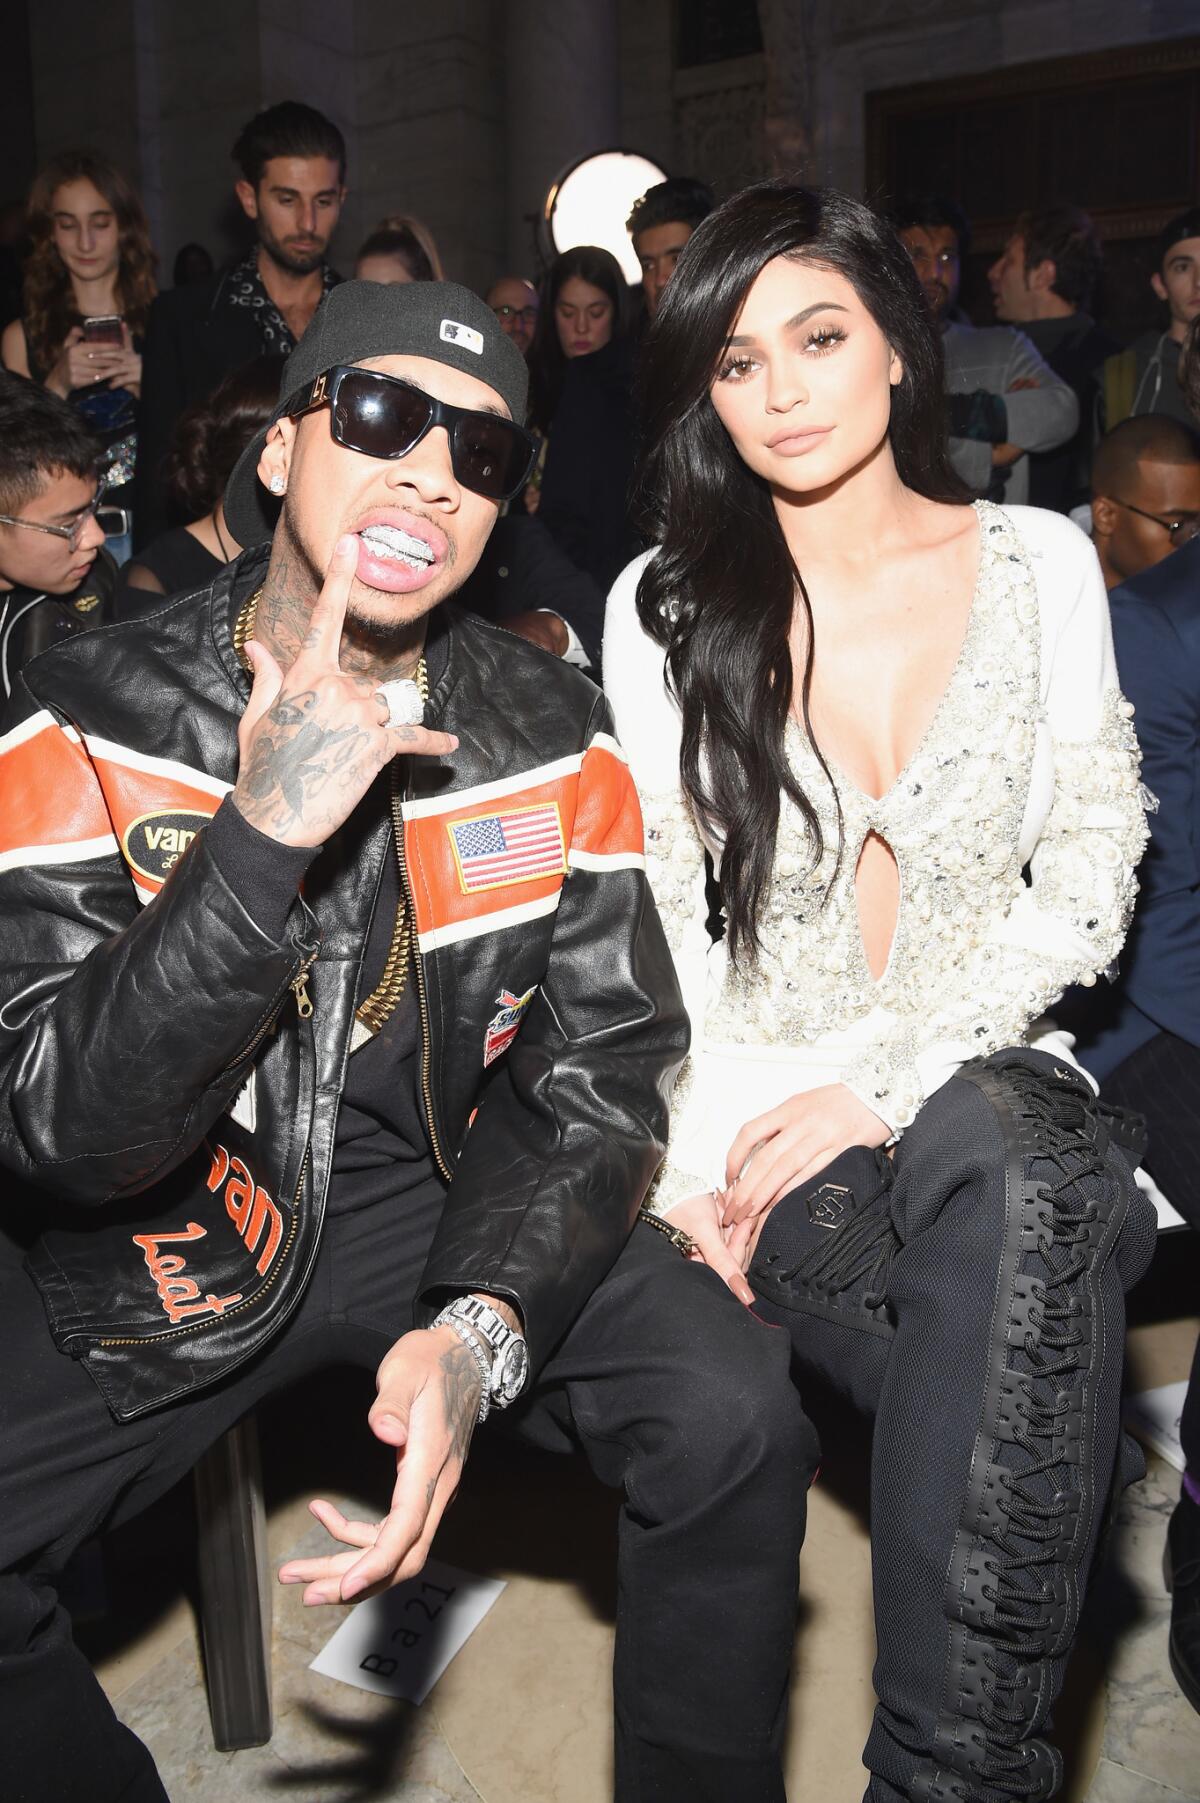 Tyga and ex-girlfriend Kylie Jenner at a New York fashion event on Feb. 13.